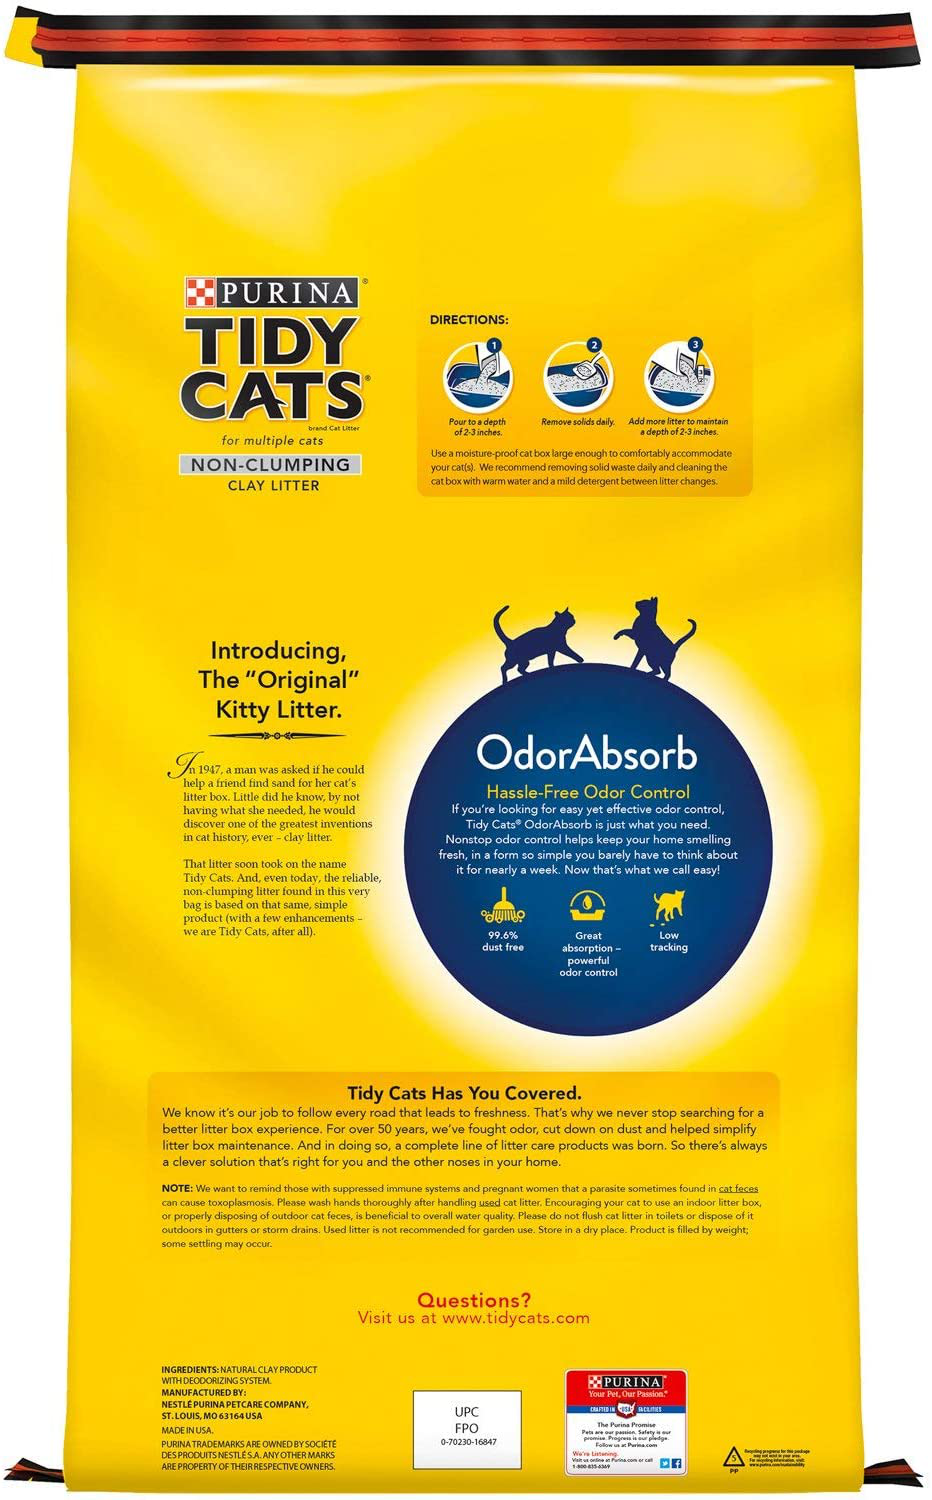 Purina Tidy Cats Non-Clumping Cat Litter for Multiple Cats (52 Lbs.)